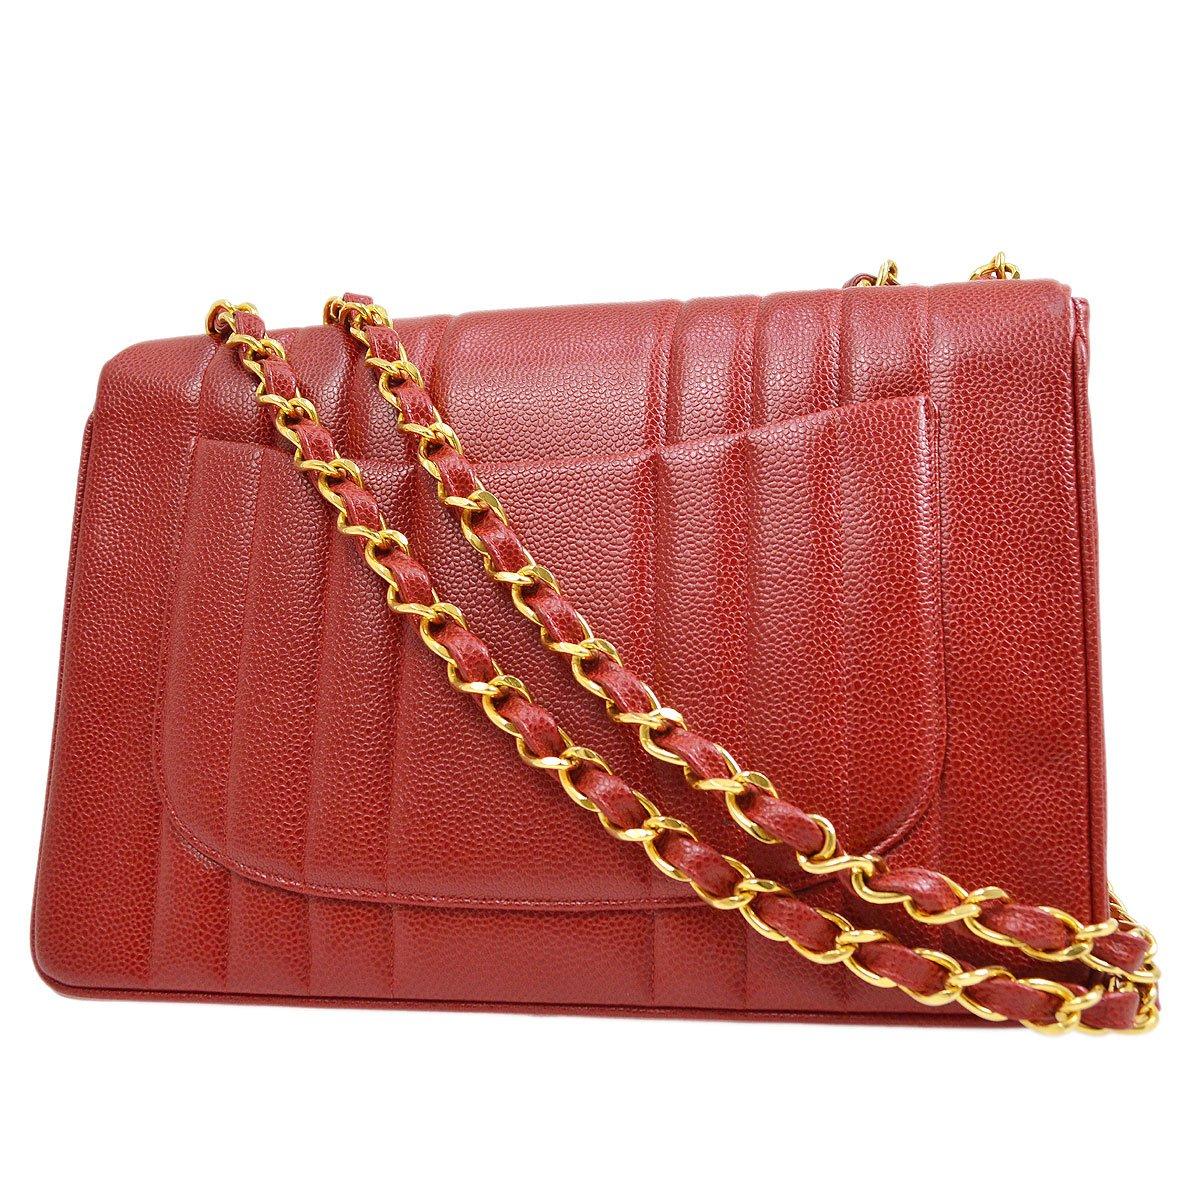 Chanel Classic Flap Jumbo Mademoiselle Chain Shoulder Bag Red Caviar Skin In Good Condition For Sale In London, GB